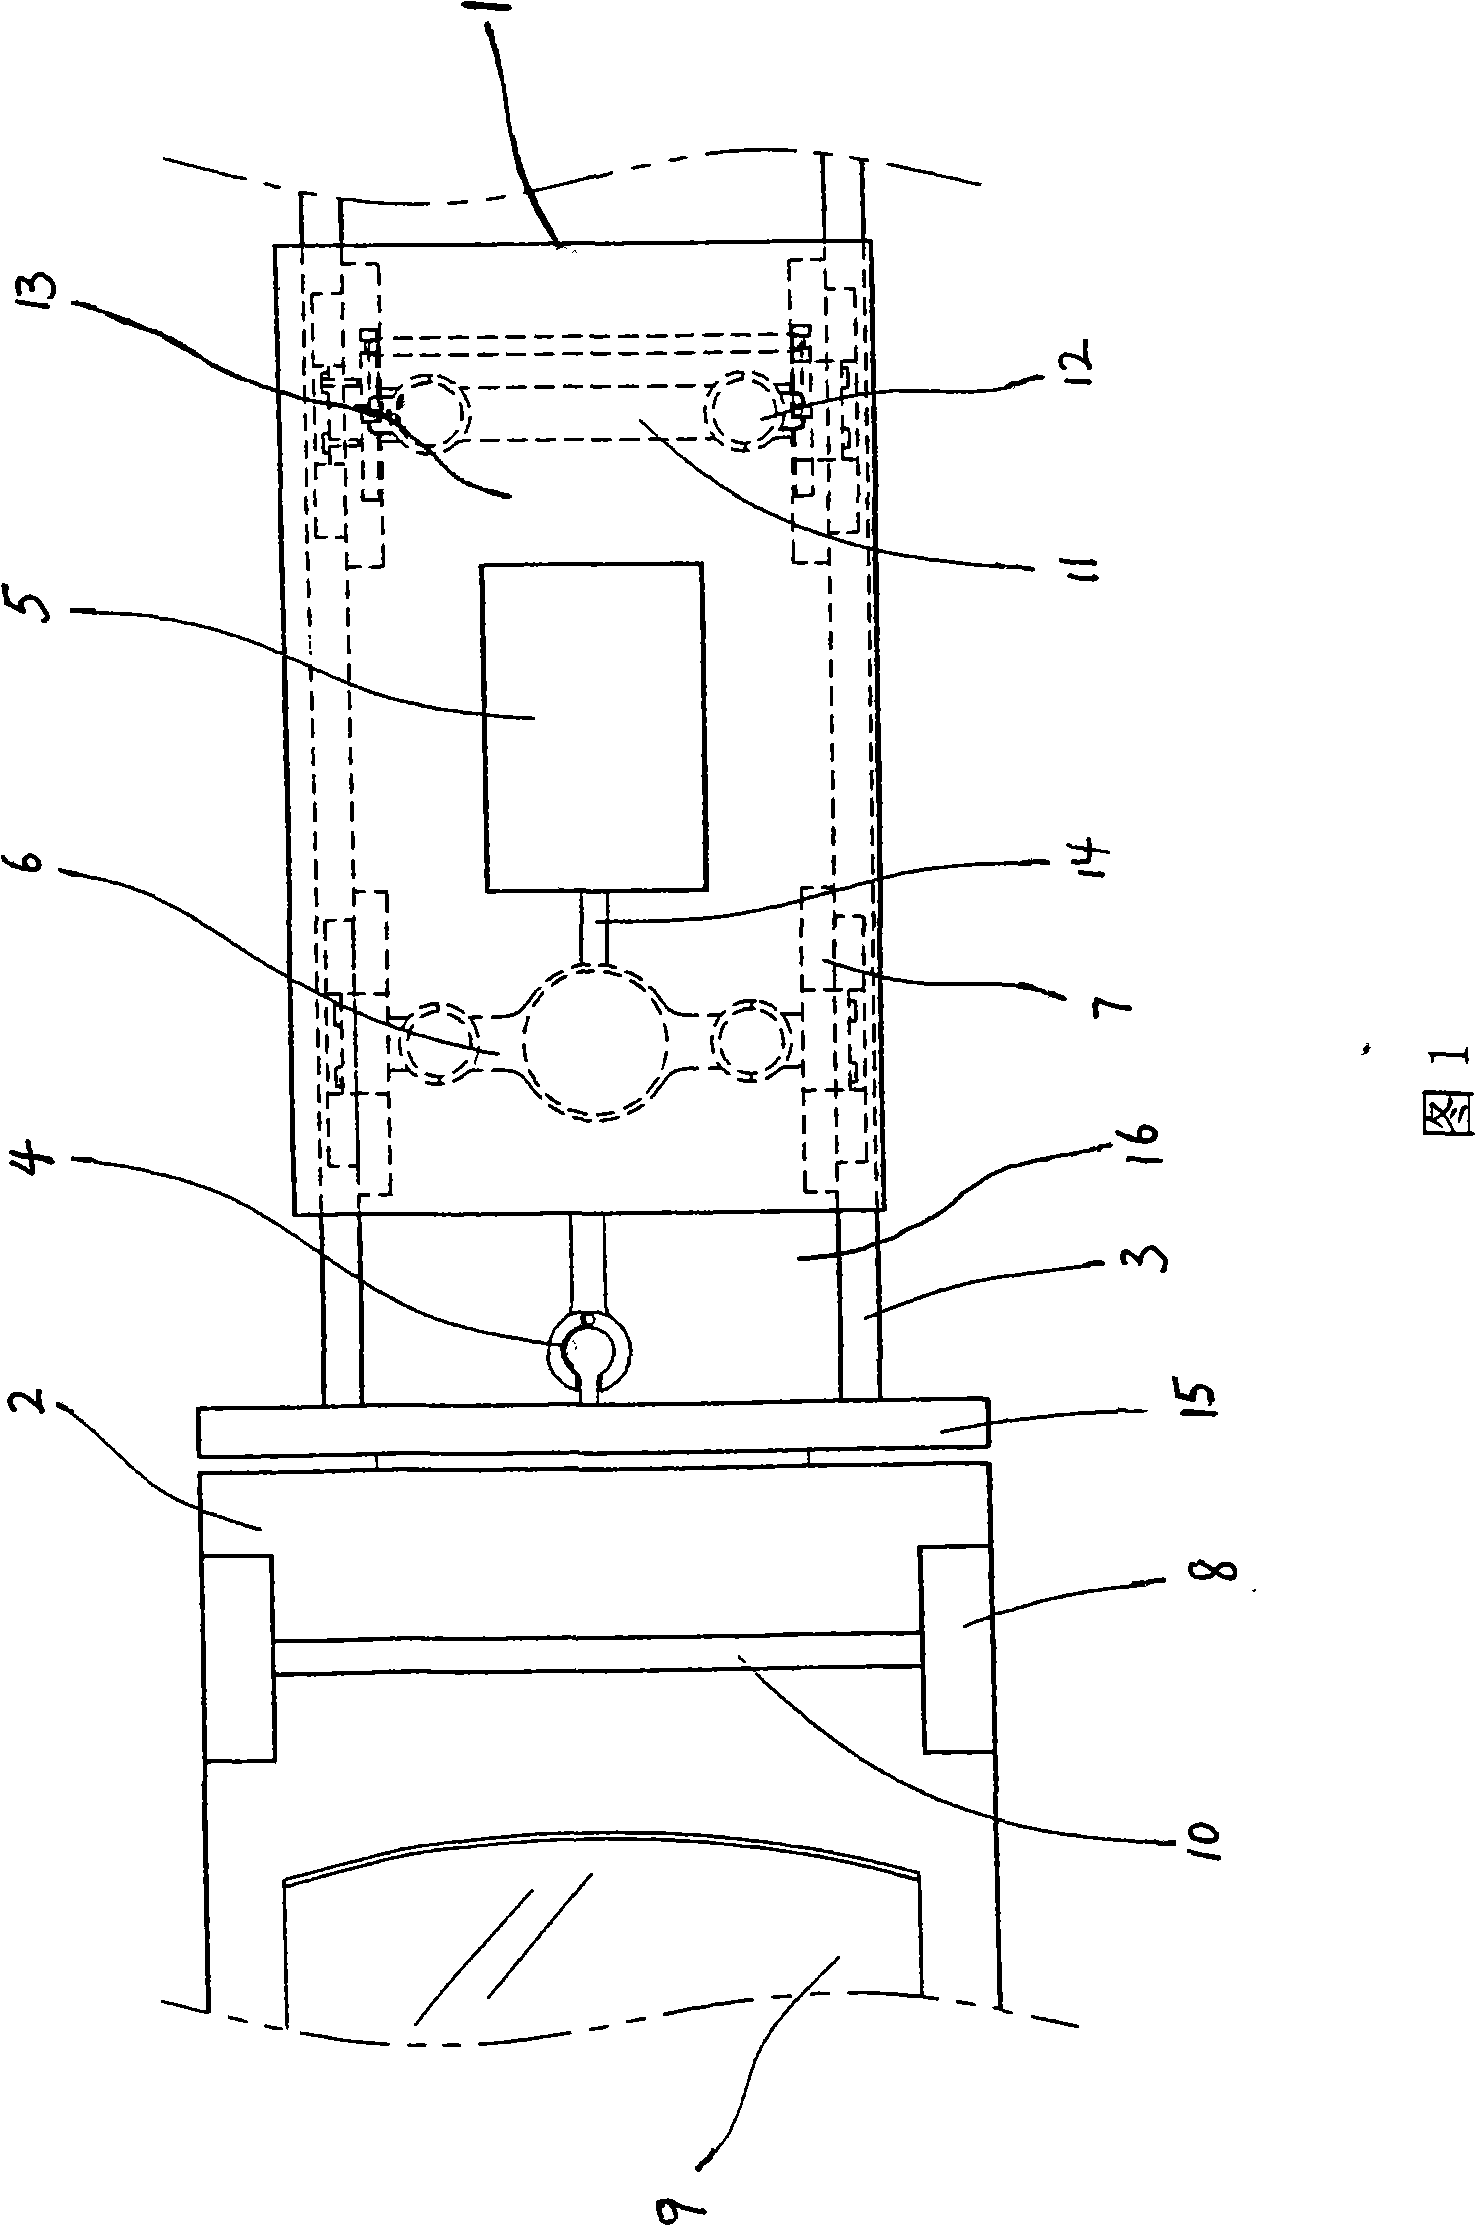 Long-distance displacement system of electrization towing type automobile